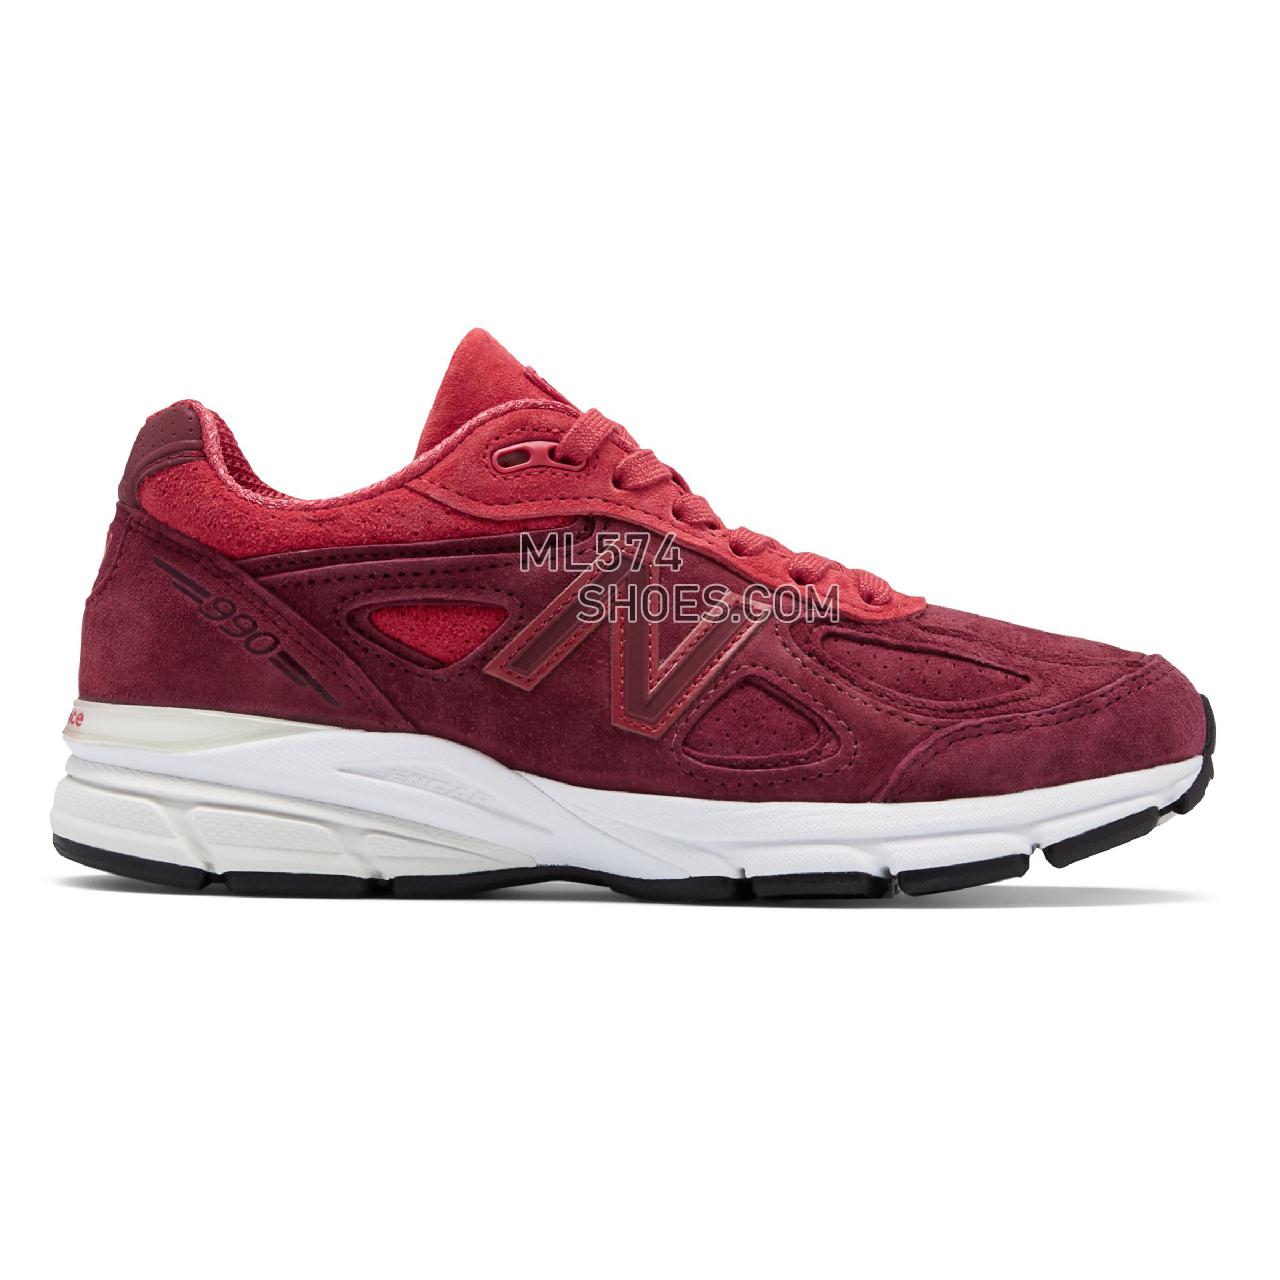 New Balance Womens 990v4 Made in US - Women's 990 - Running Vortex with Mercury Red - W990VT4